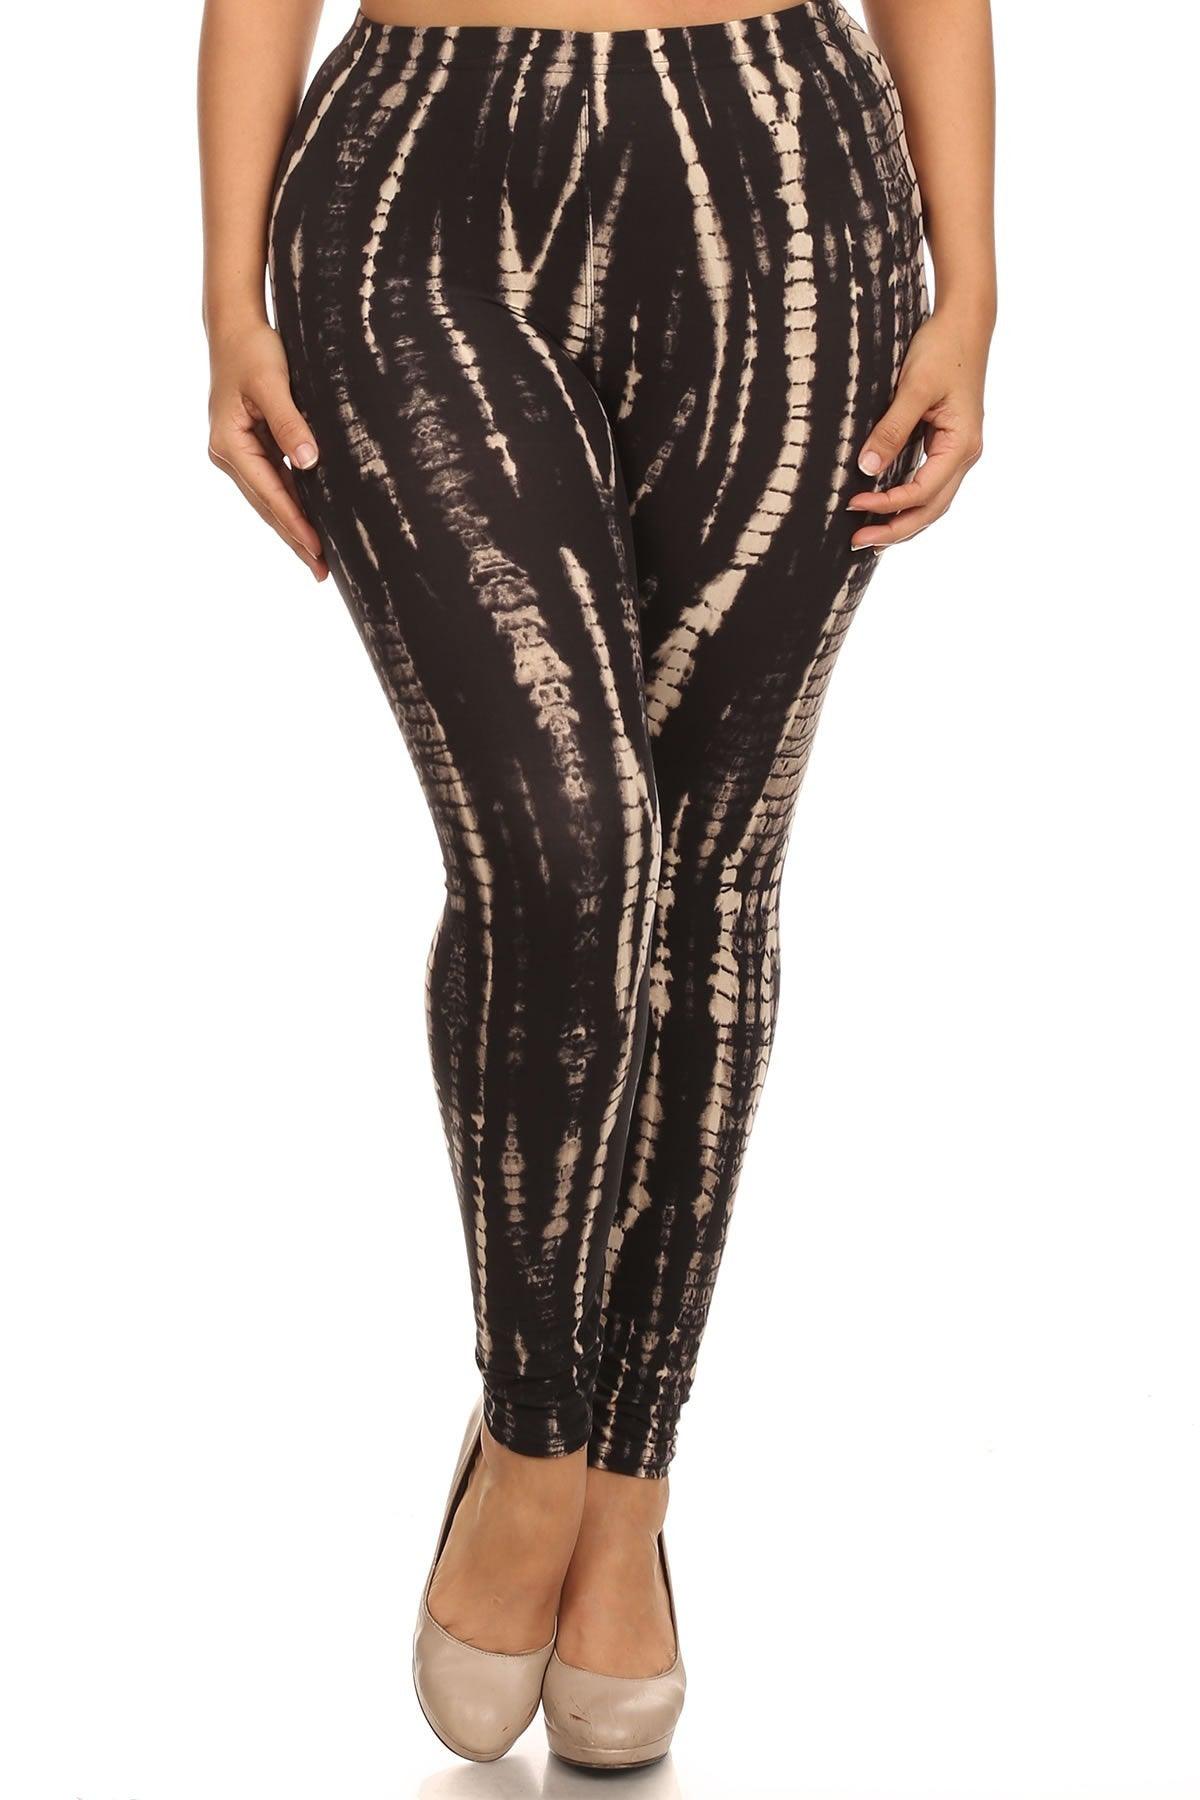 Plus Size Black And Tan Tie Dye Print Full Length Fitted Leggings With High Waist. - Kreative Passions